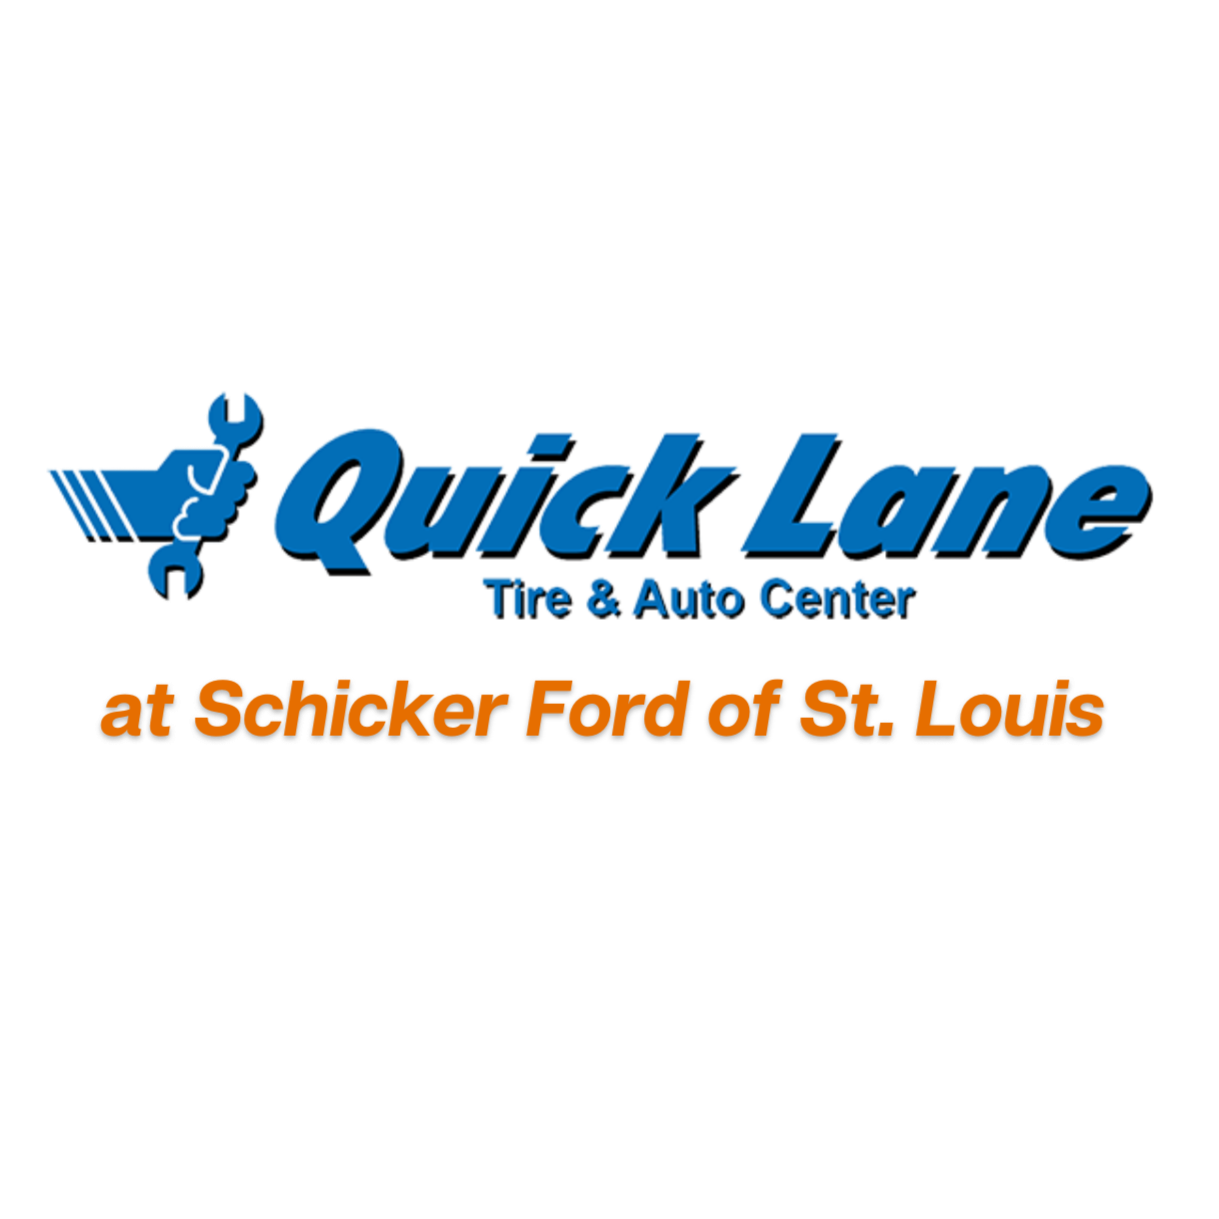 Quick Lane at Schicker Ford of St. Louis - St. Louis, MO 63116 - (314)655-7100 | ShowMeLocal.com